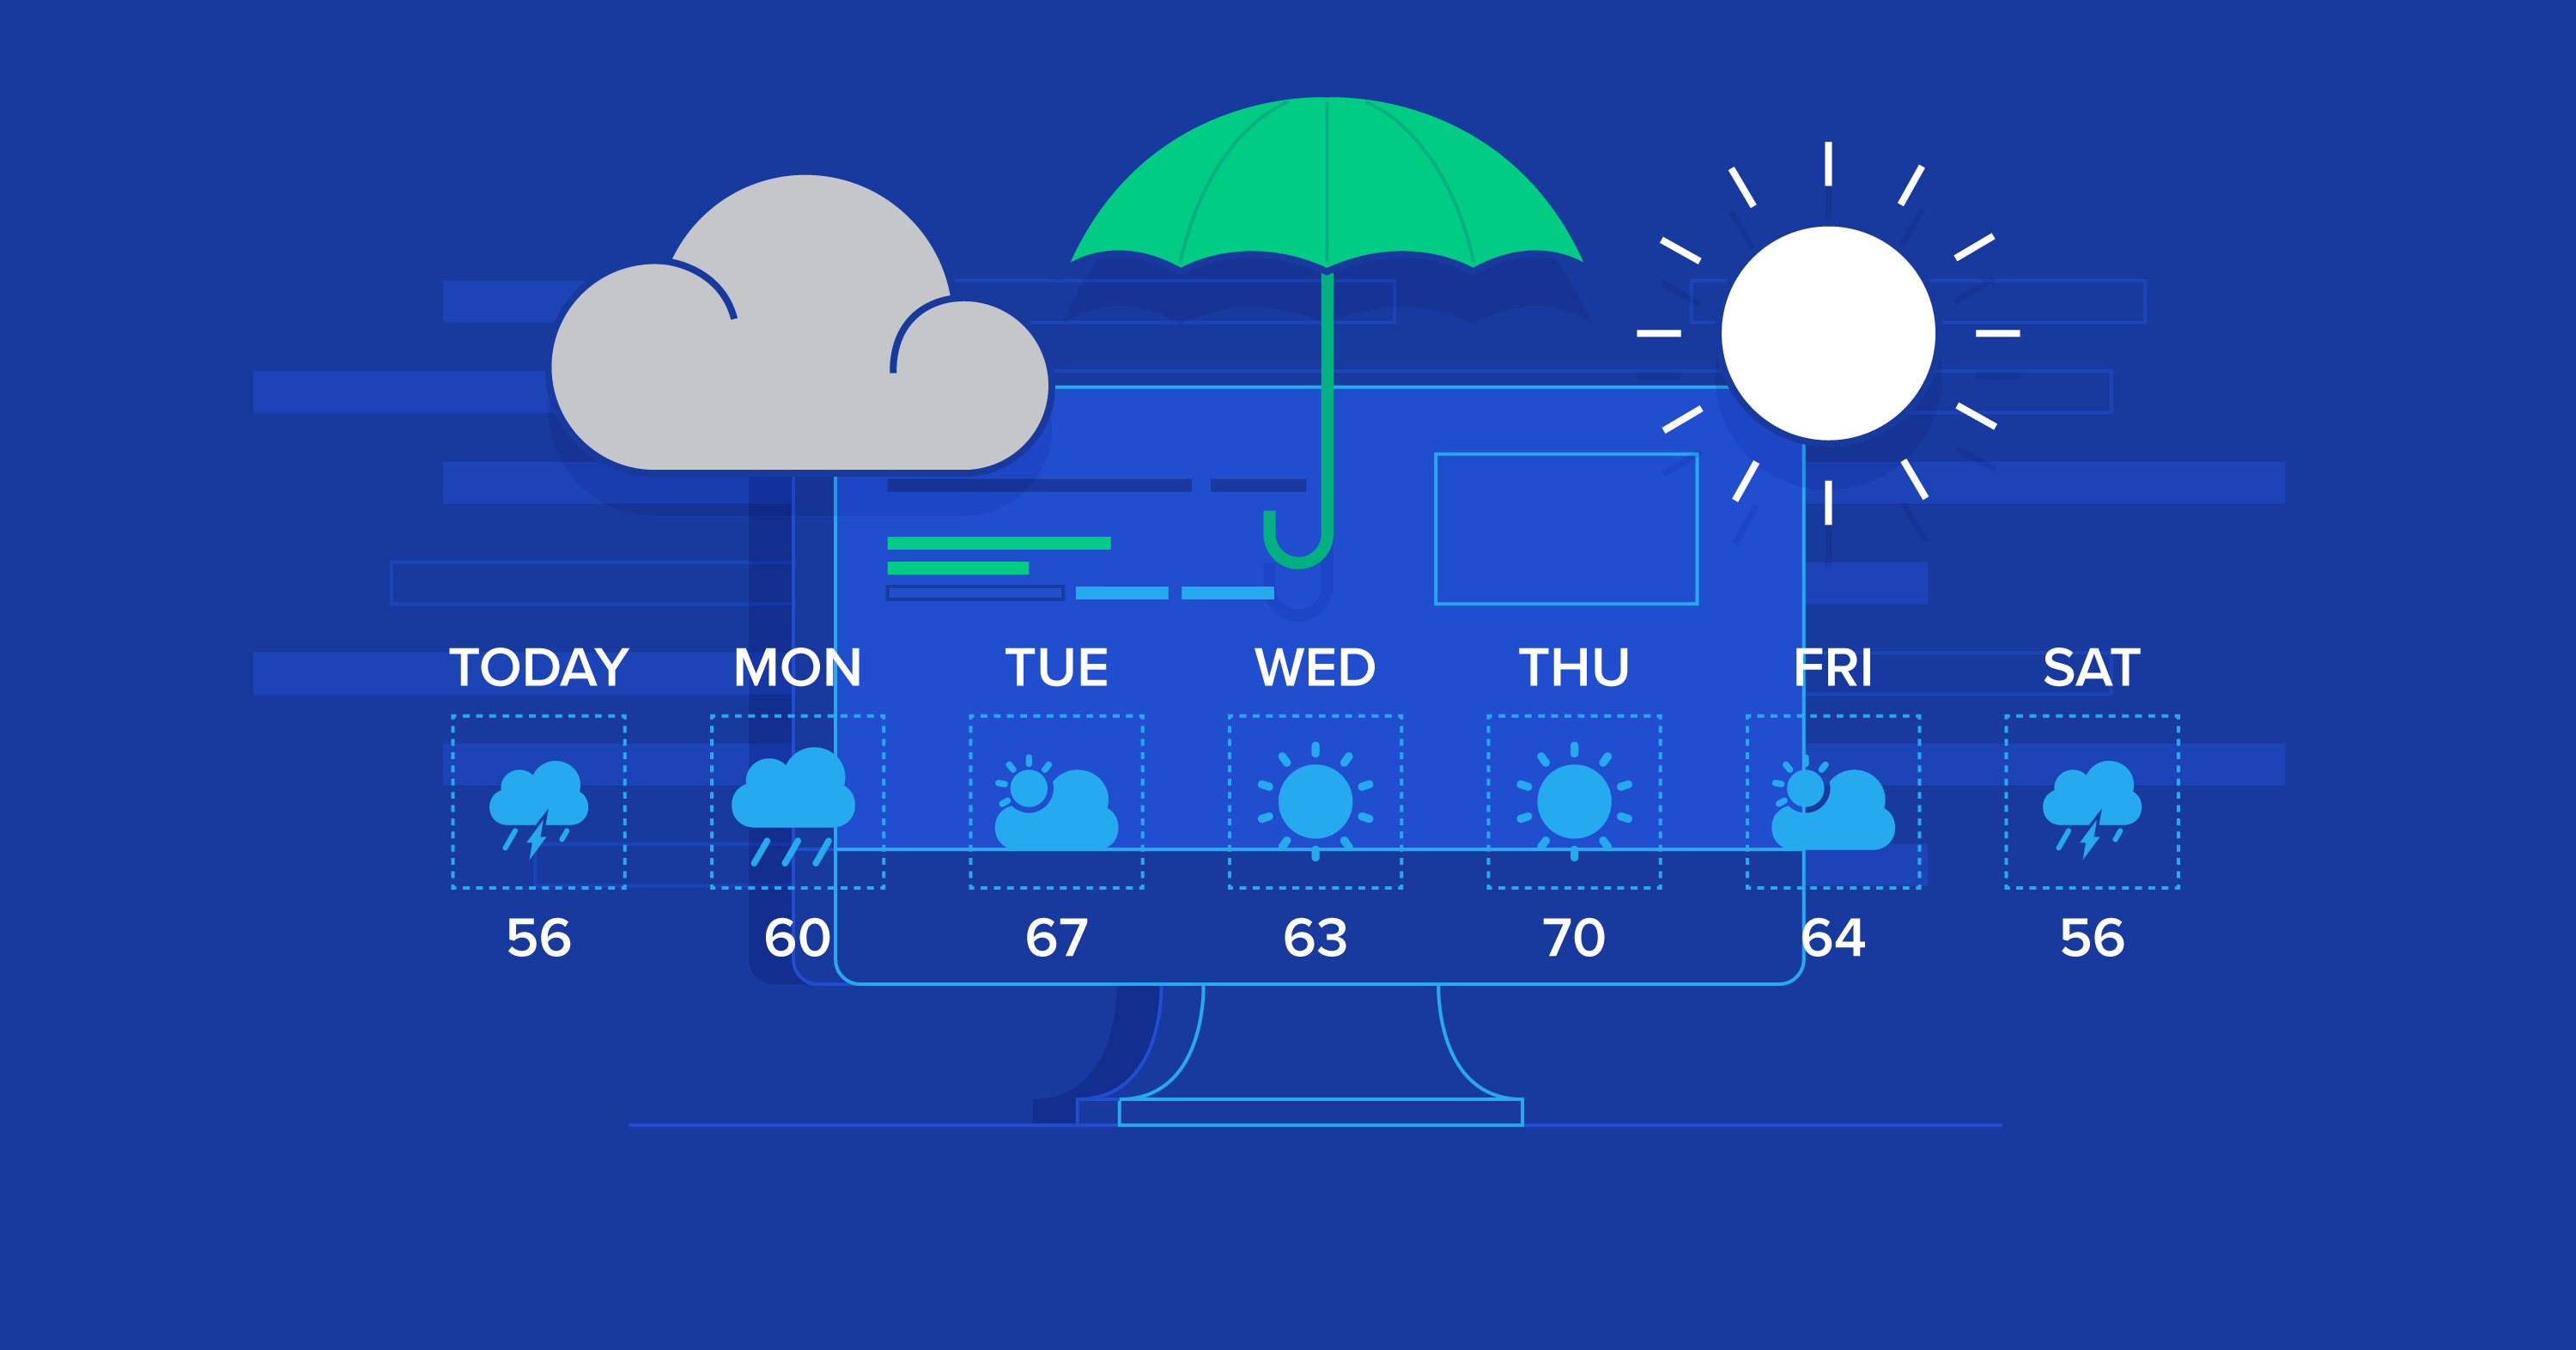 How I Used Apache Spark and Docker in a Hackathon to Build a Weather App